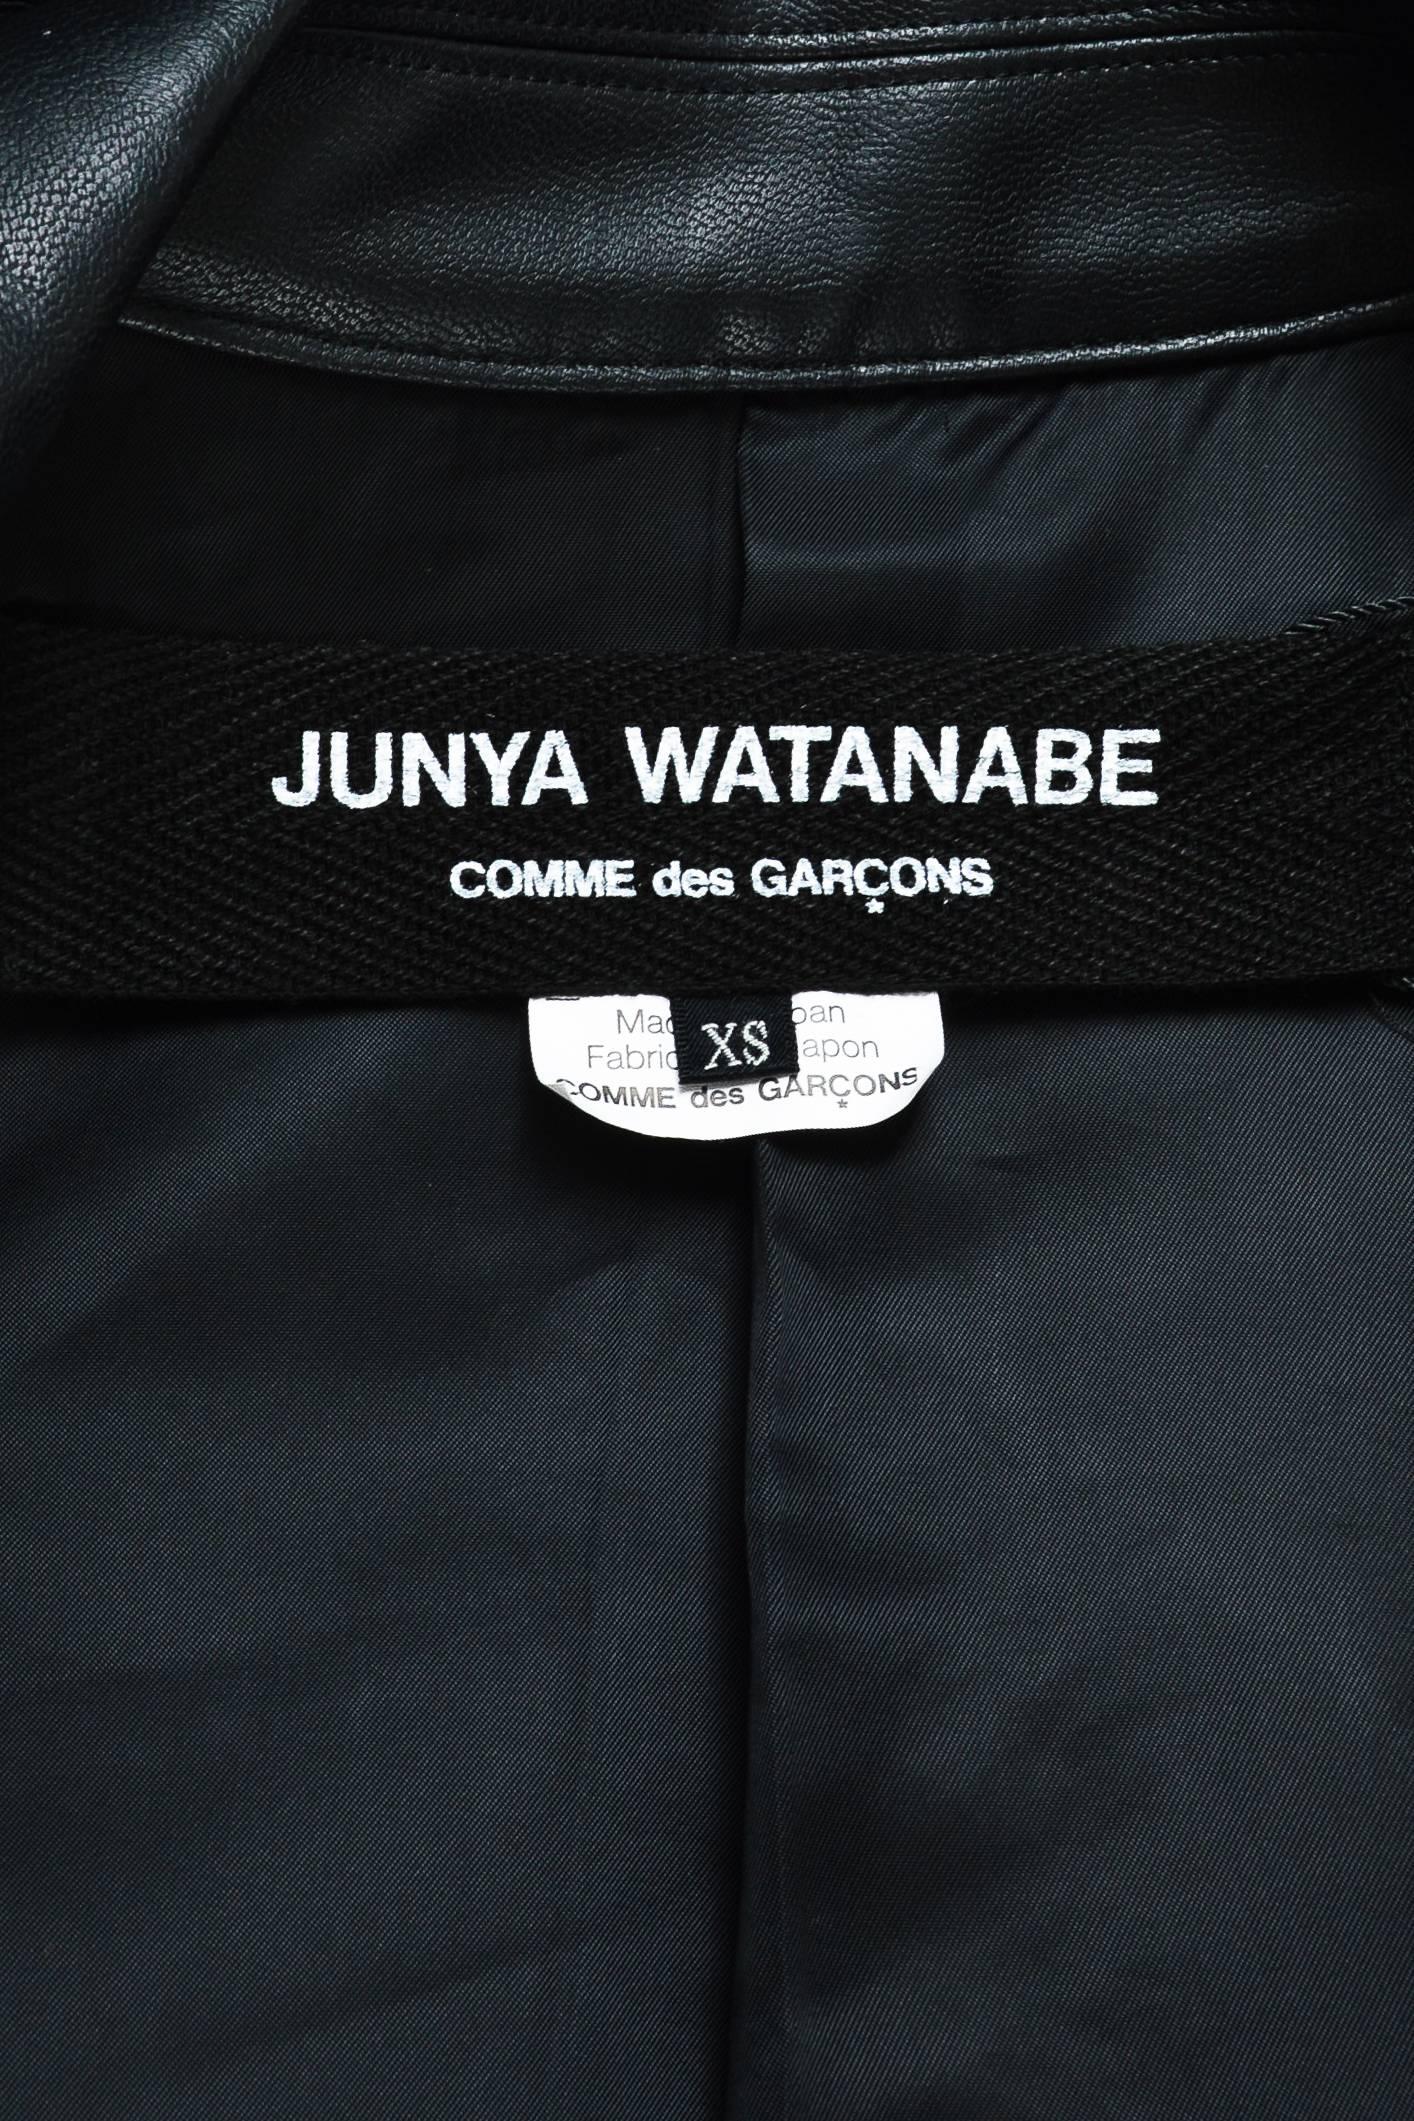 Junya Watanabe Comme des Garcons Black Faux Leather Ribbed Zip Trench Coat SZ XS In Excellent Condition For Sale In Chicago, IL